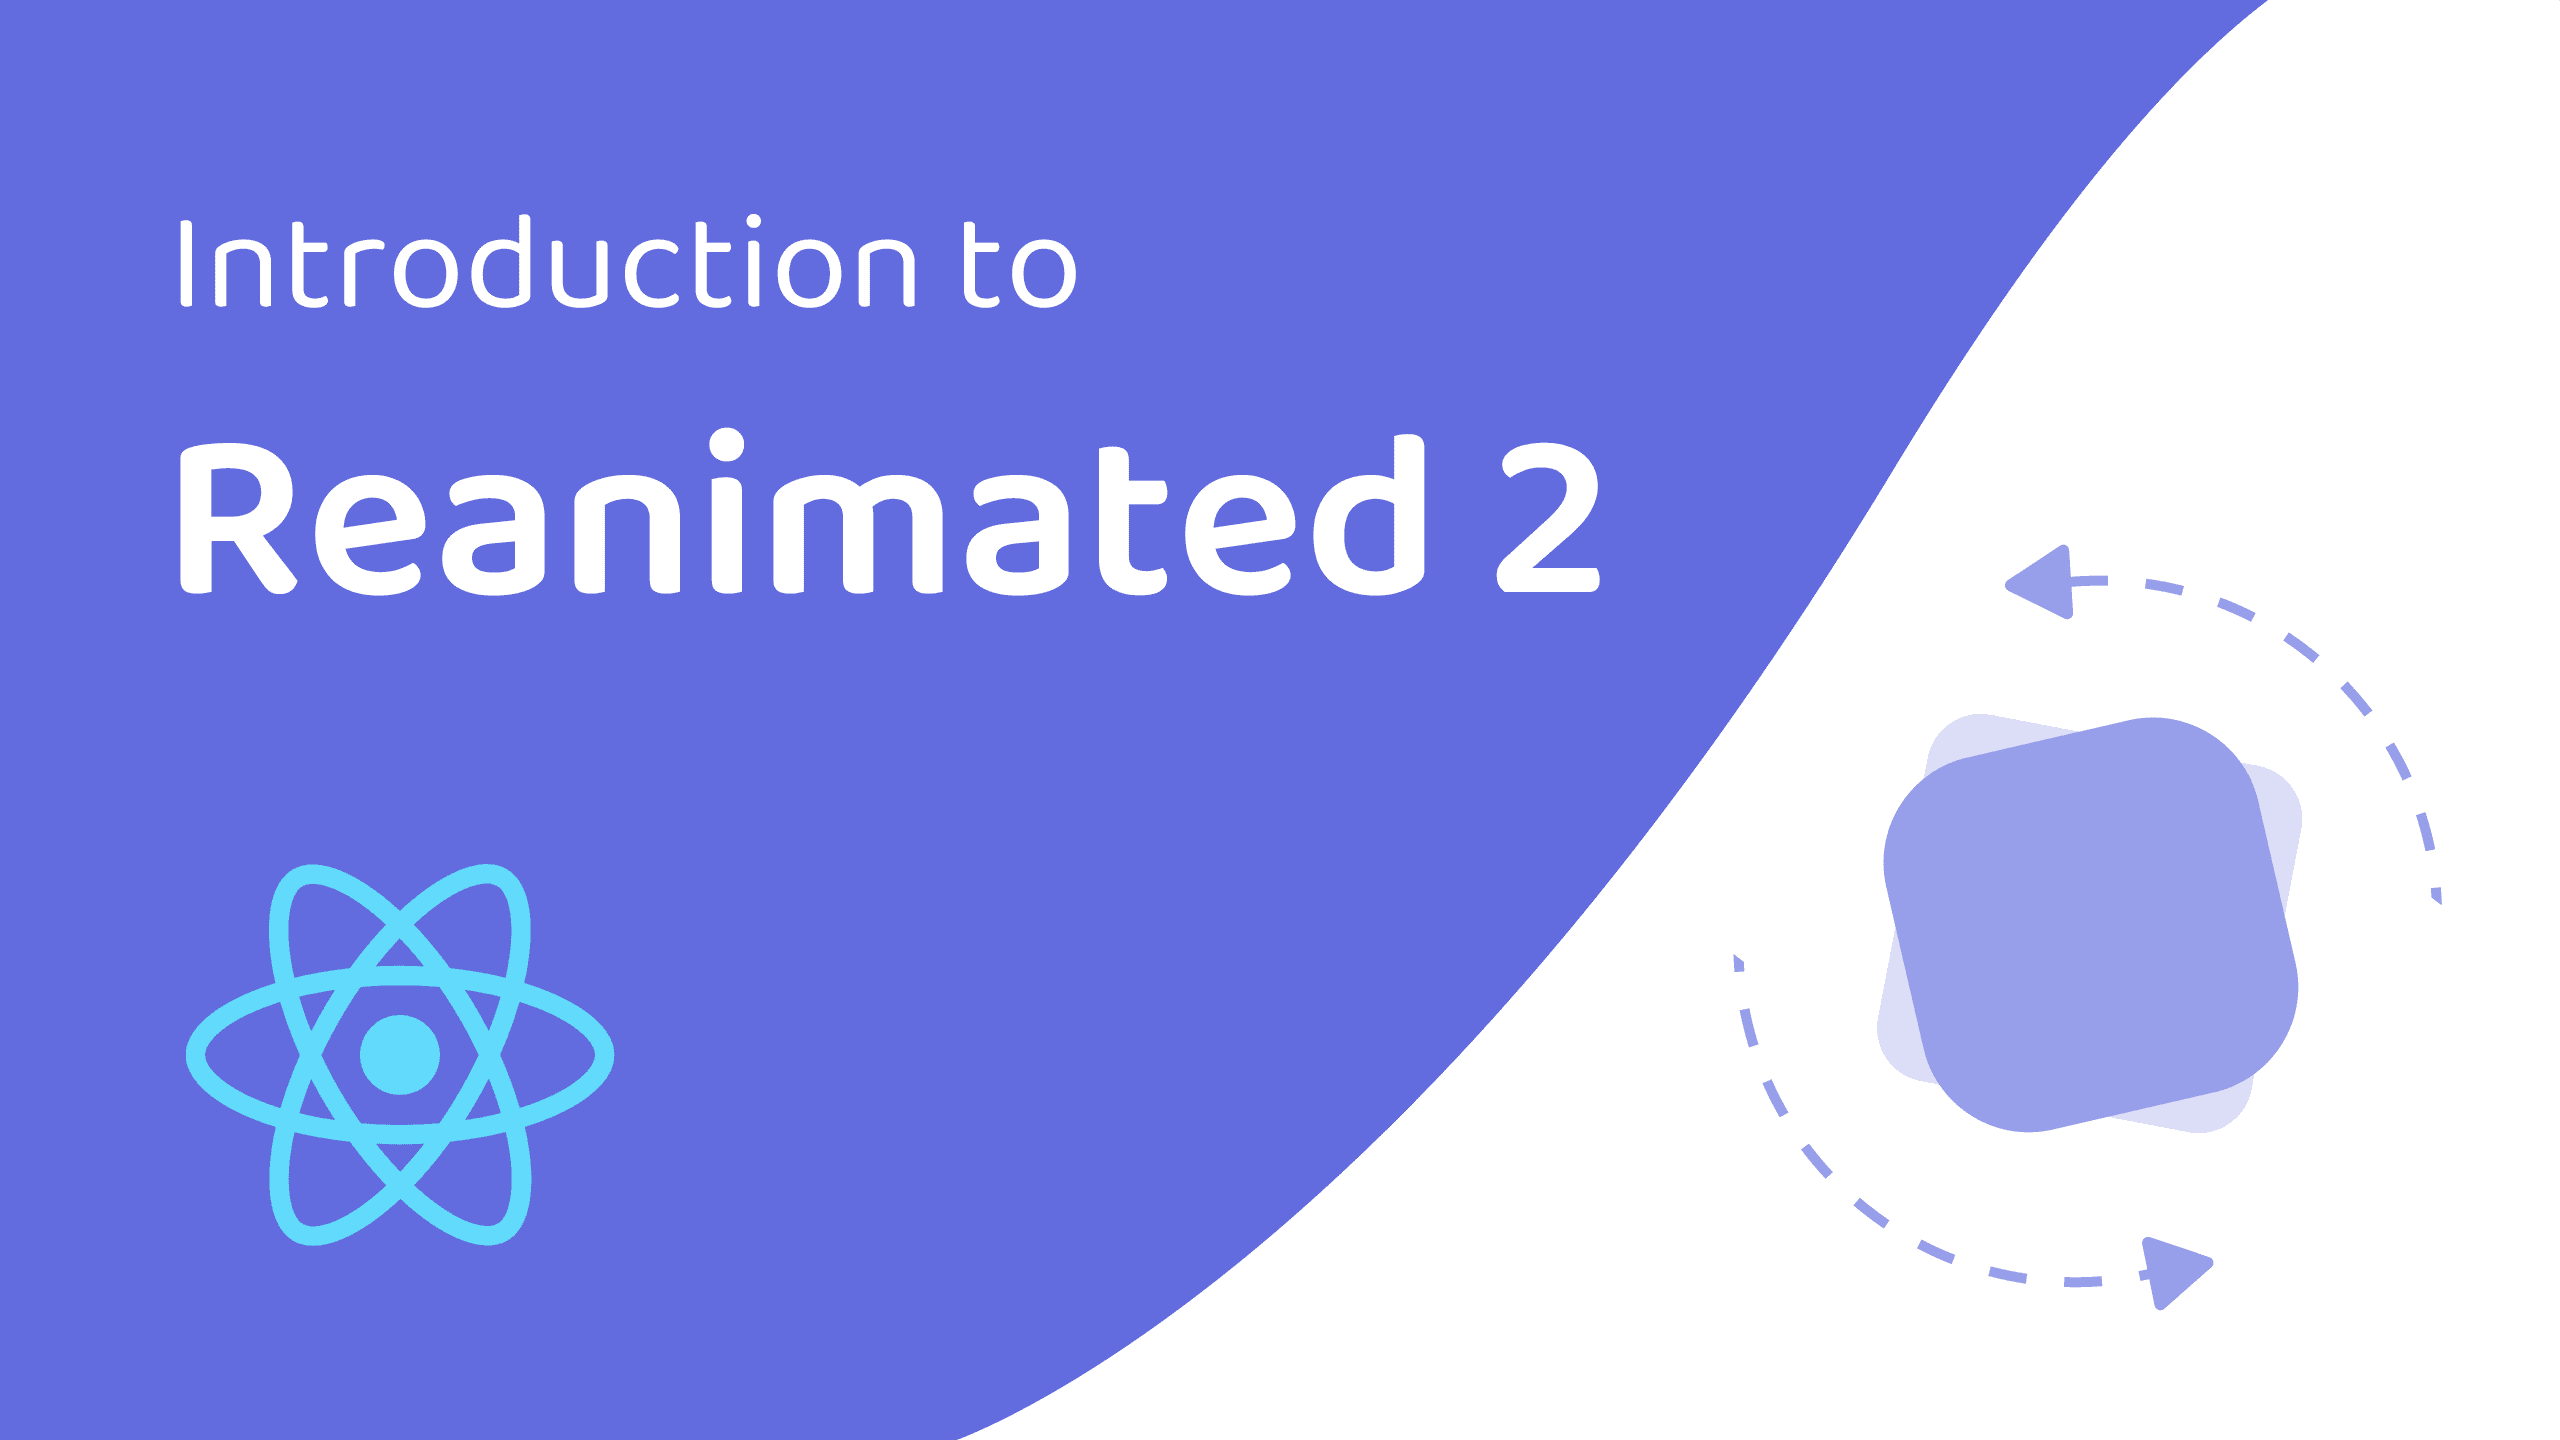 Post image - Introduction to Reanimated 2